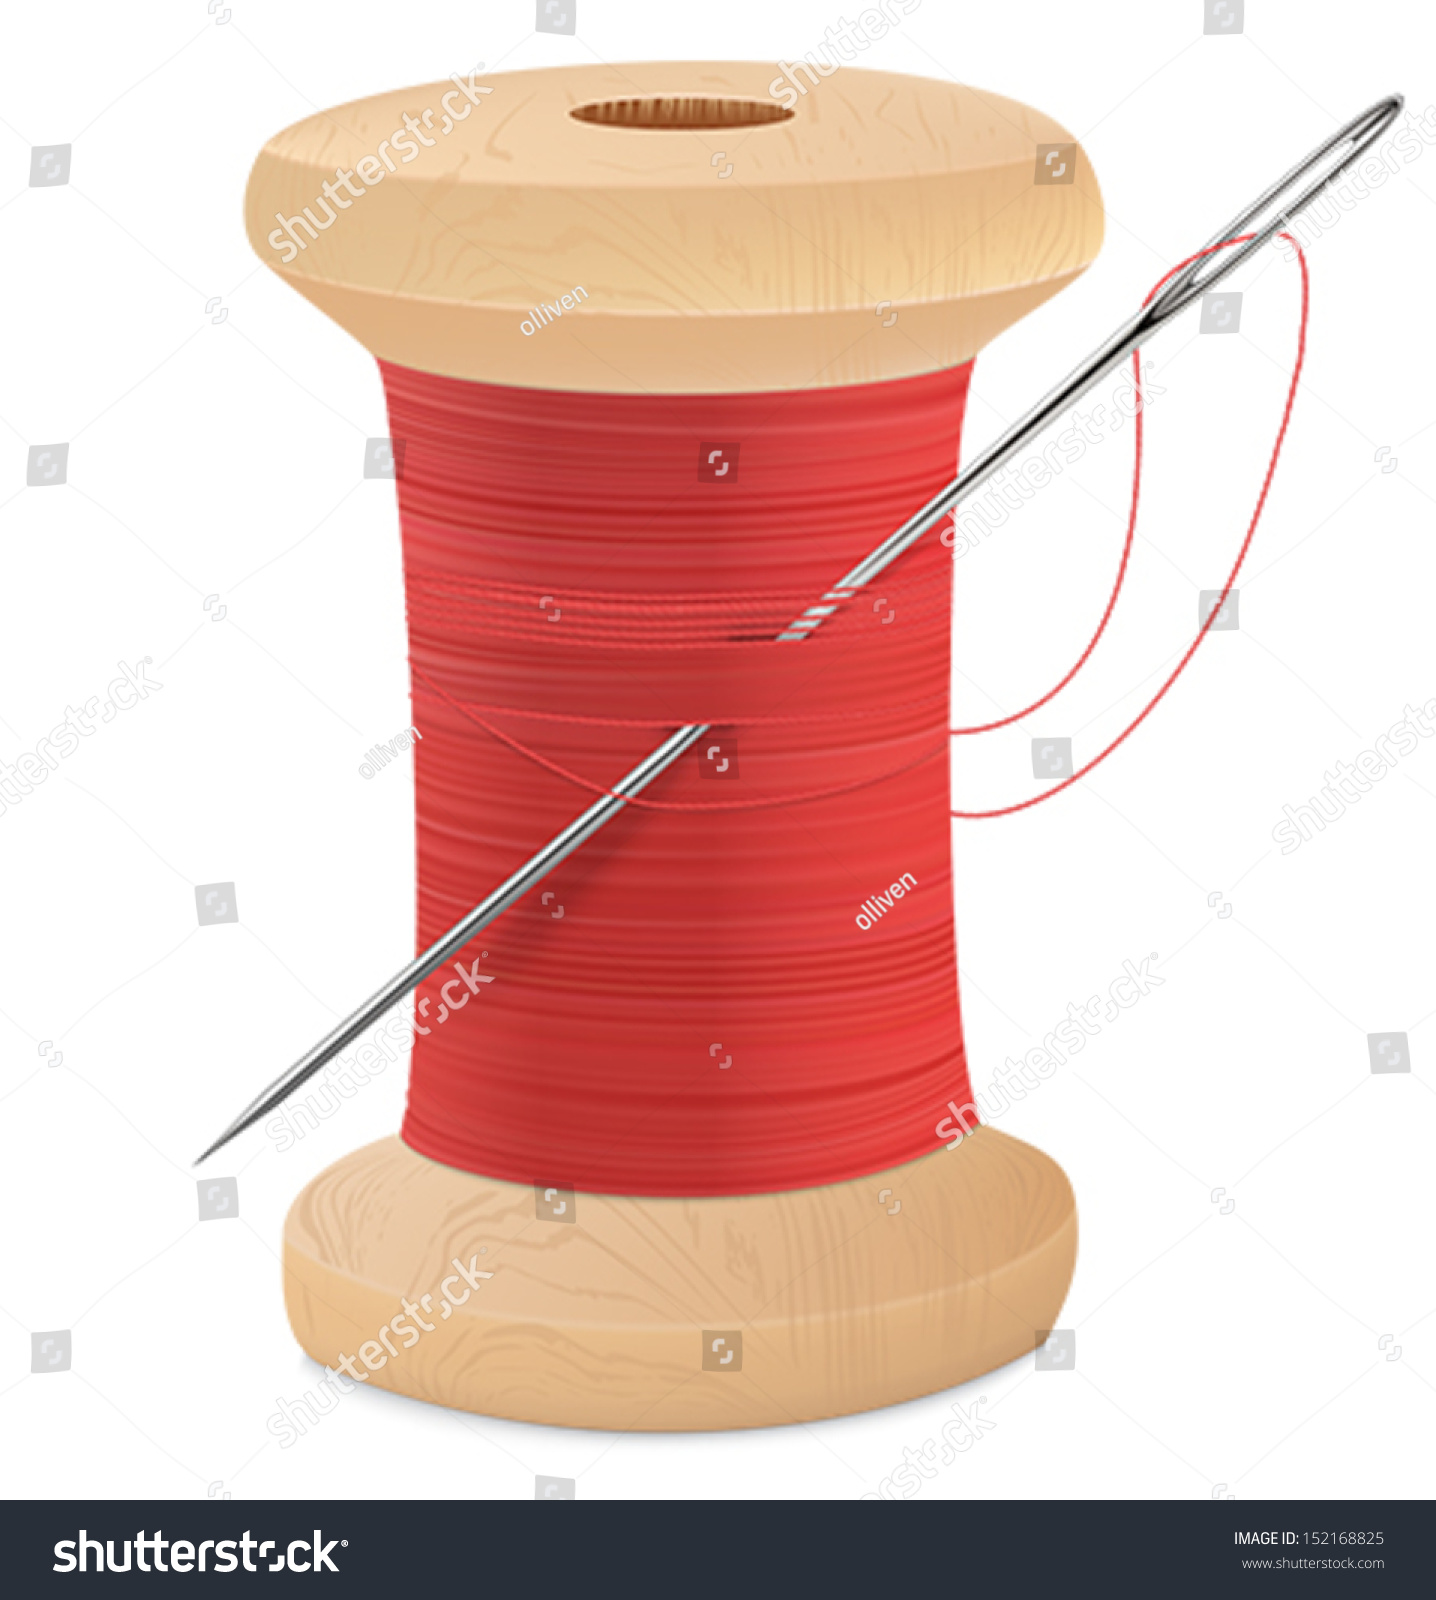 Spool Of Thread With Needle Isolated On White. Vector Illustration ...